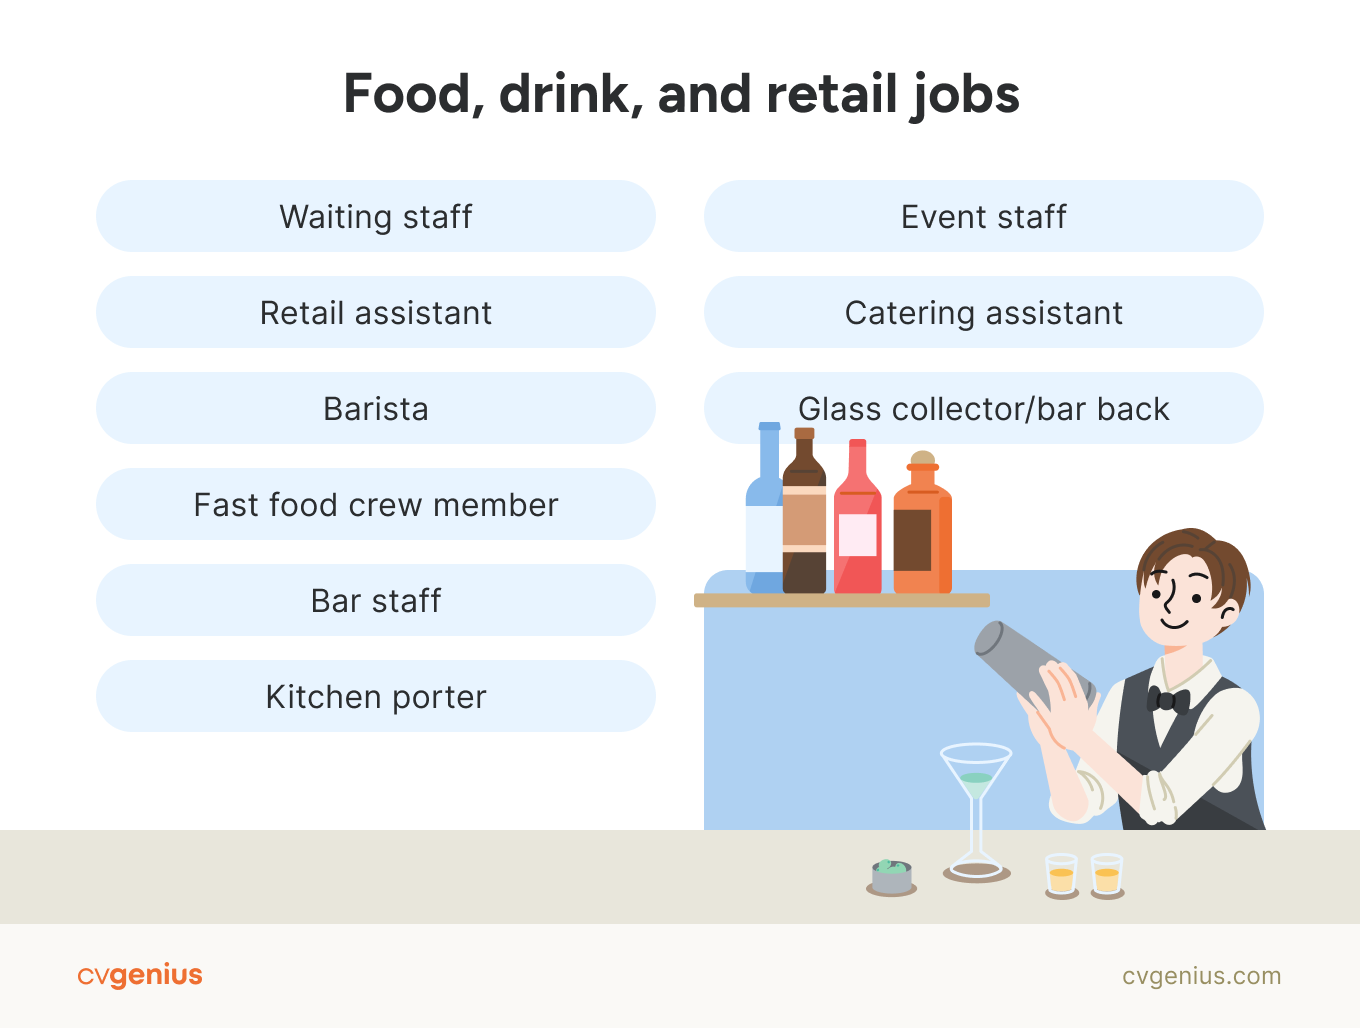 A list of food, drink, and retail jobs that don't always require a CV.